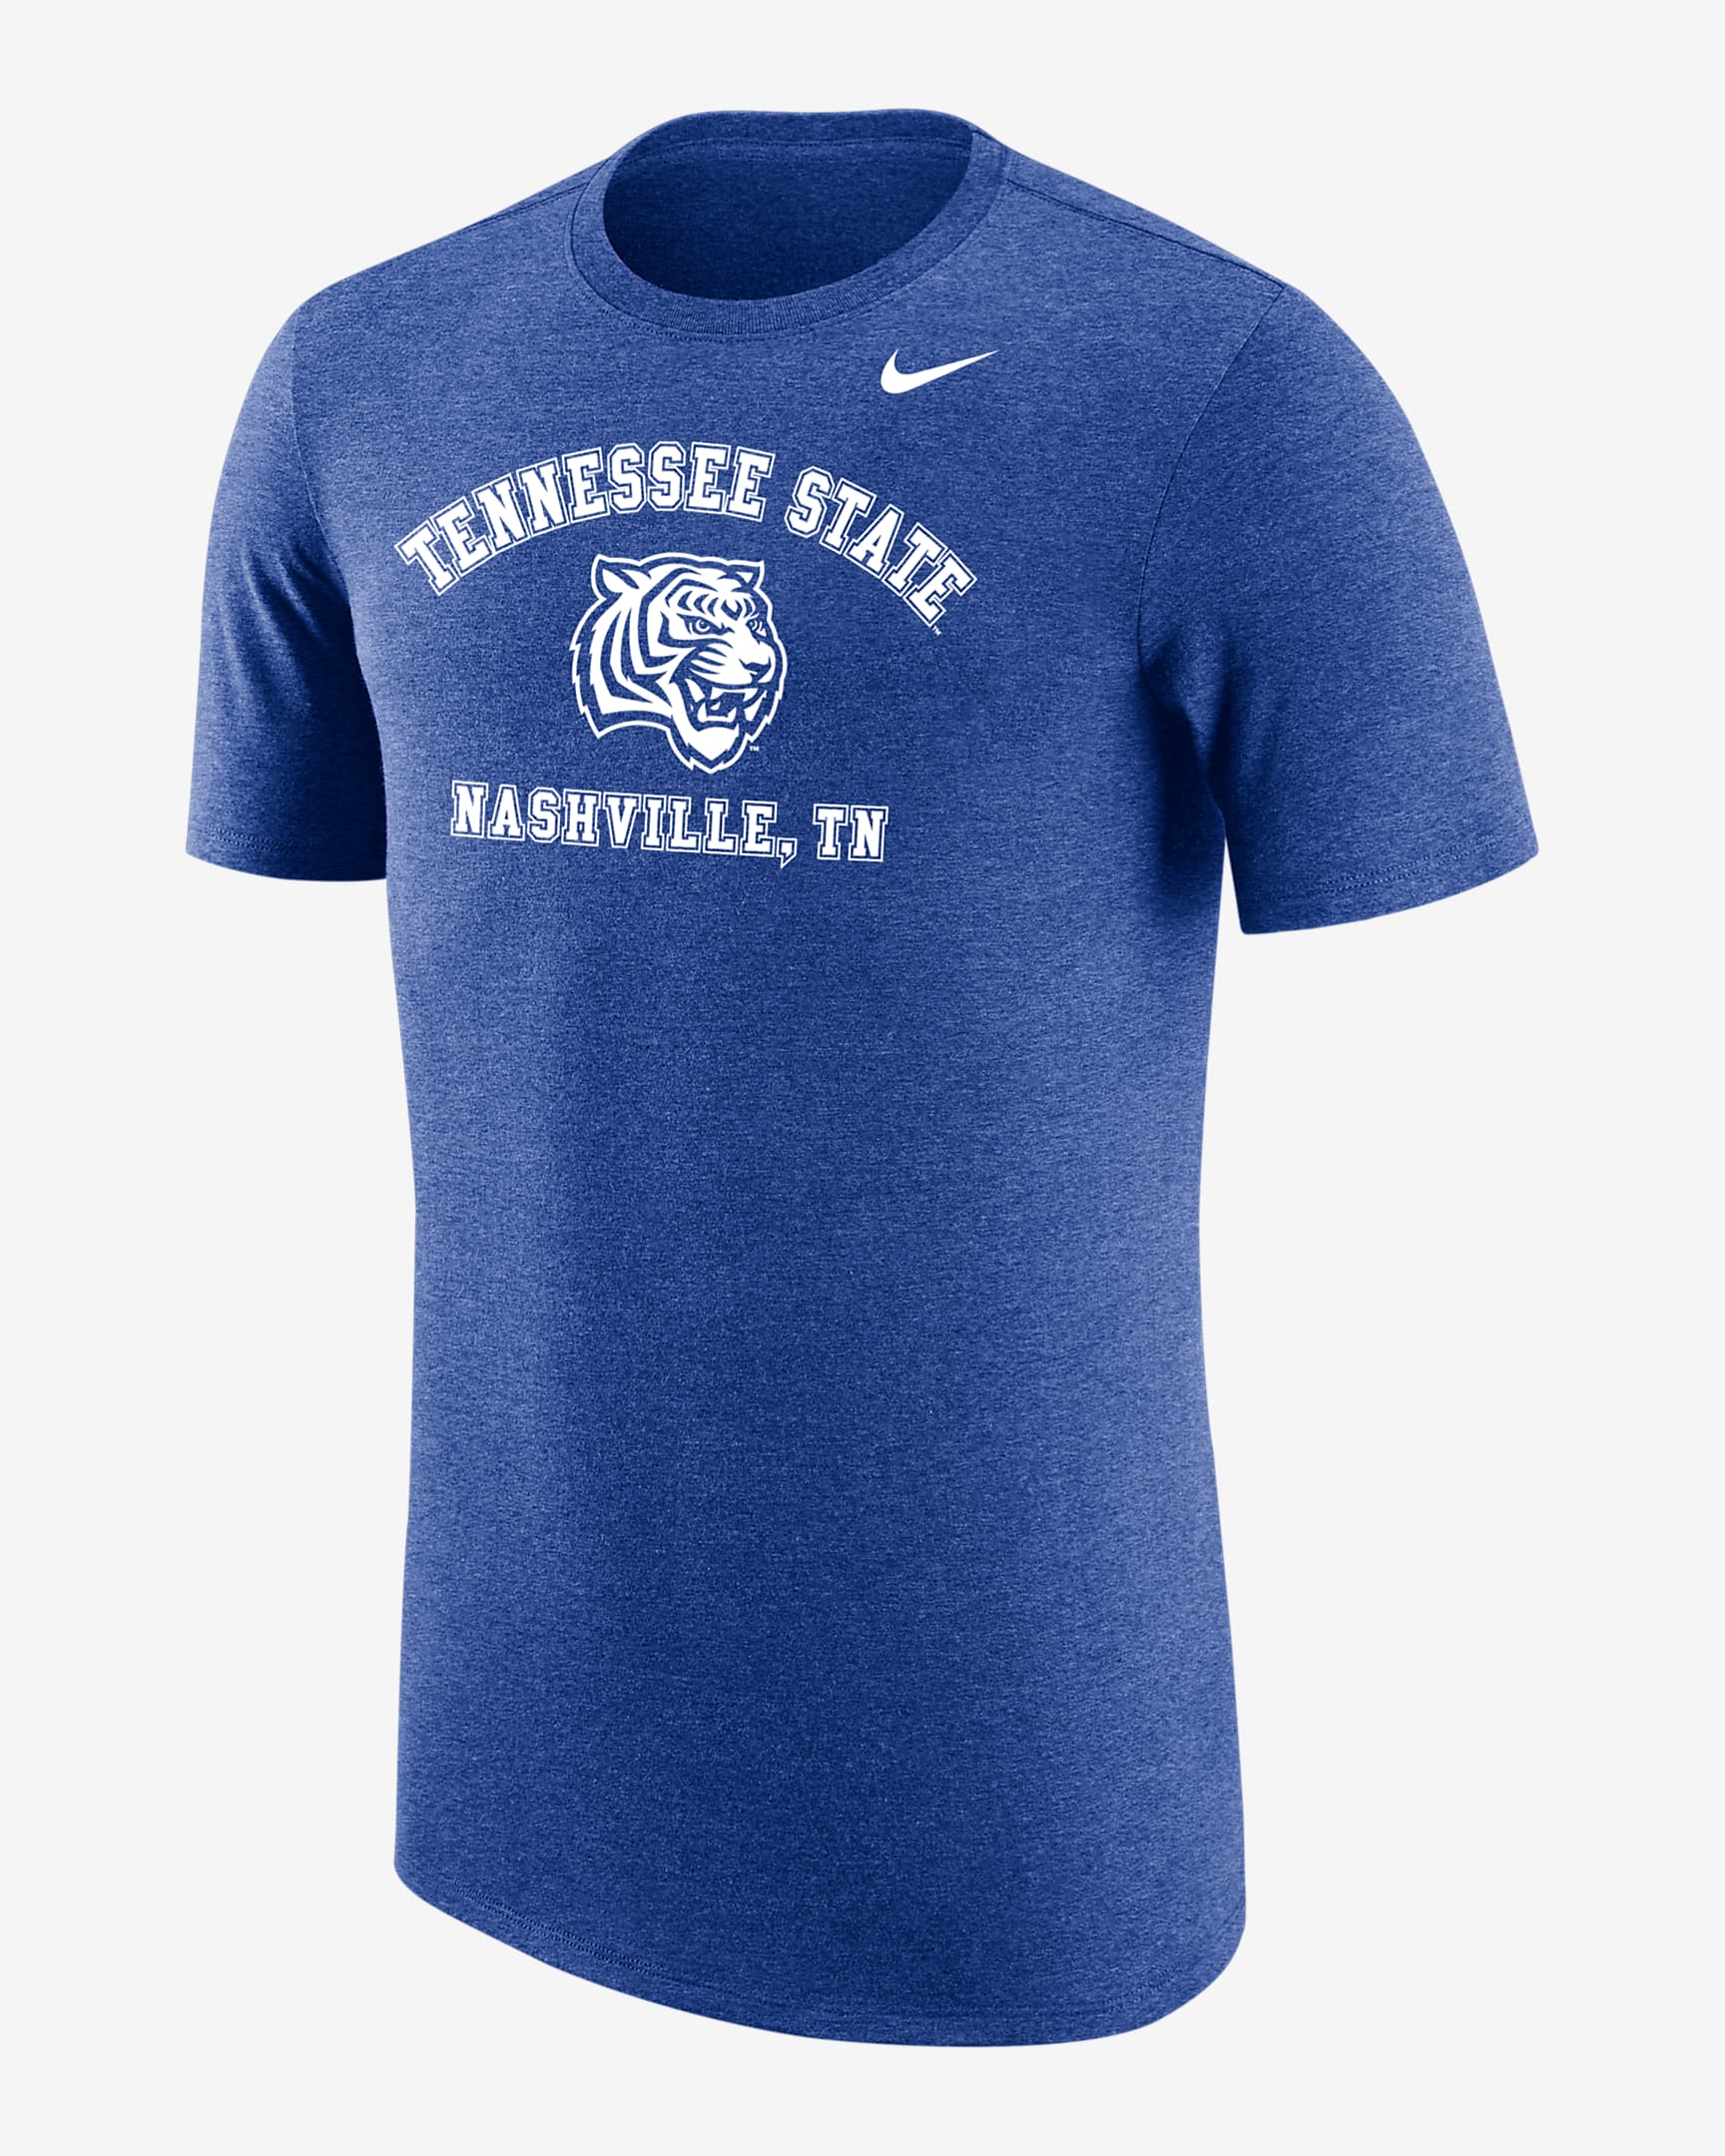 Tennessee State Men's Nike College T-Shirt. Nike.com